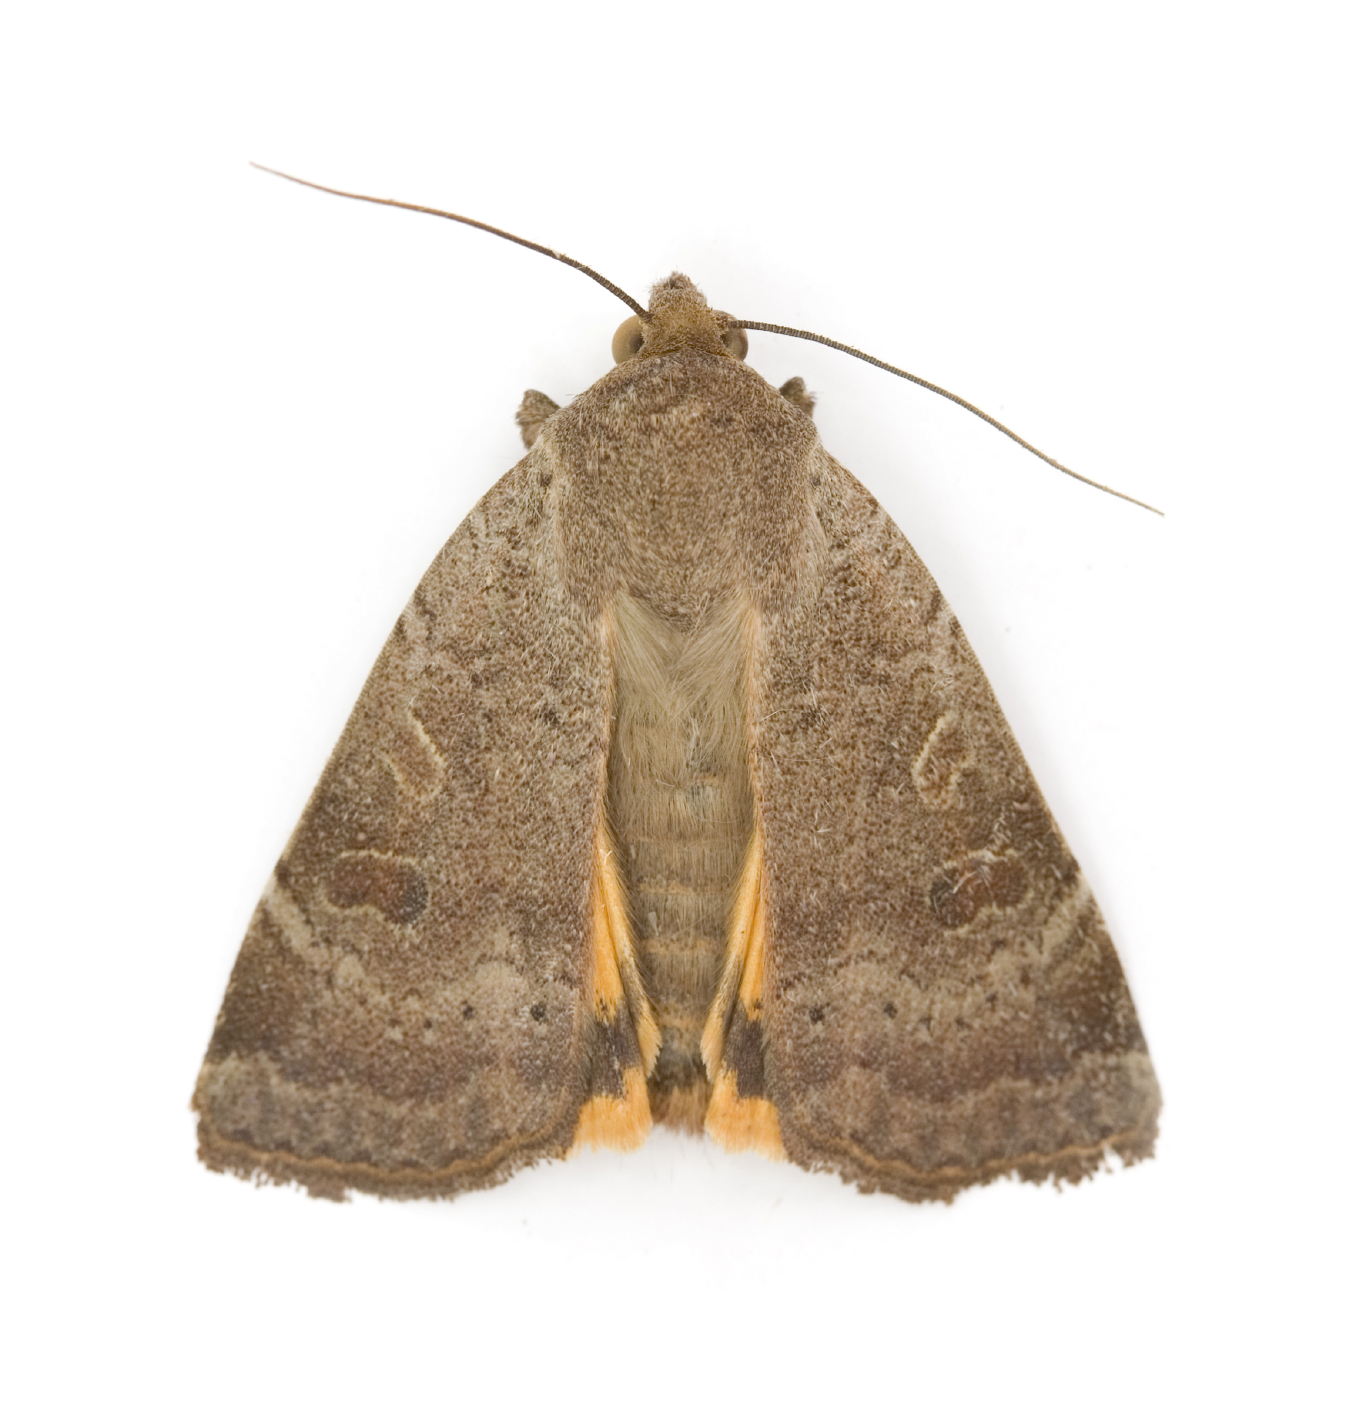 Moth Treatment, Removal and Repair Service